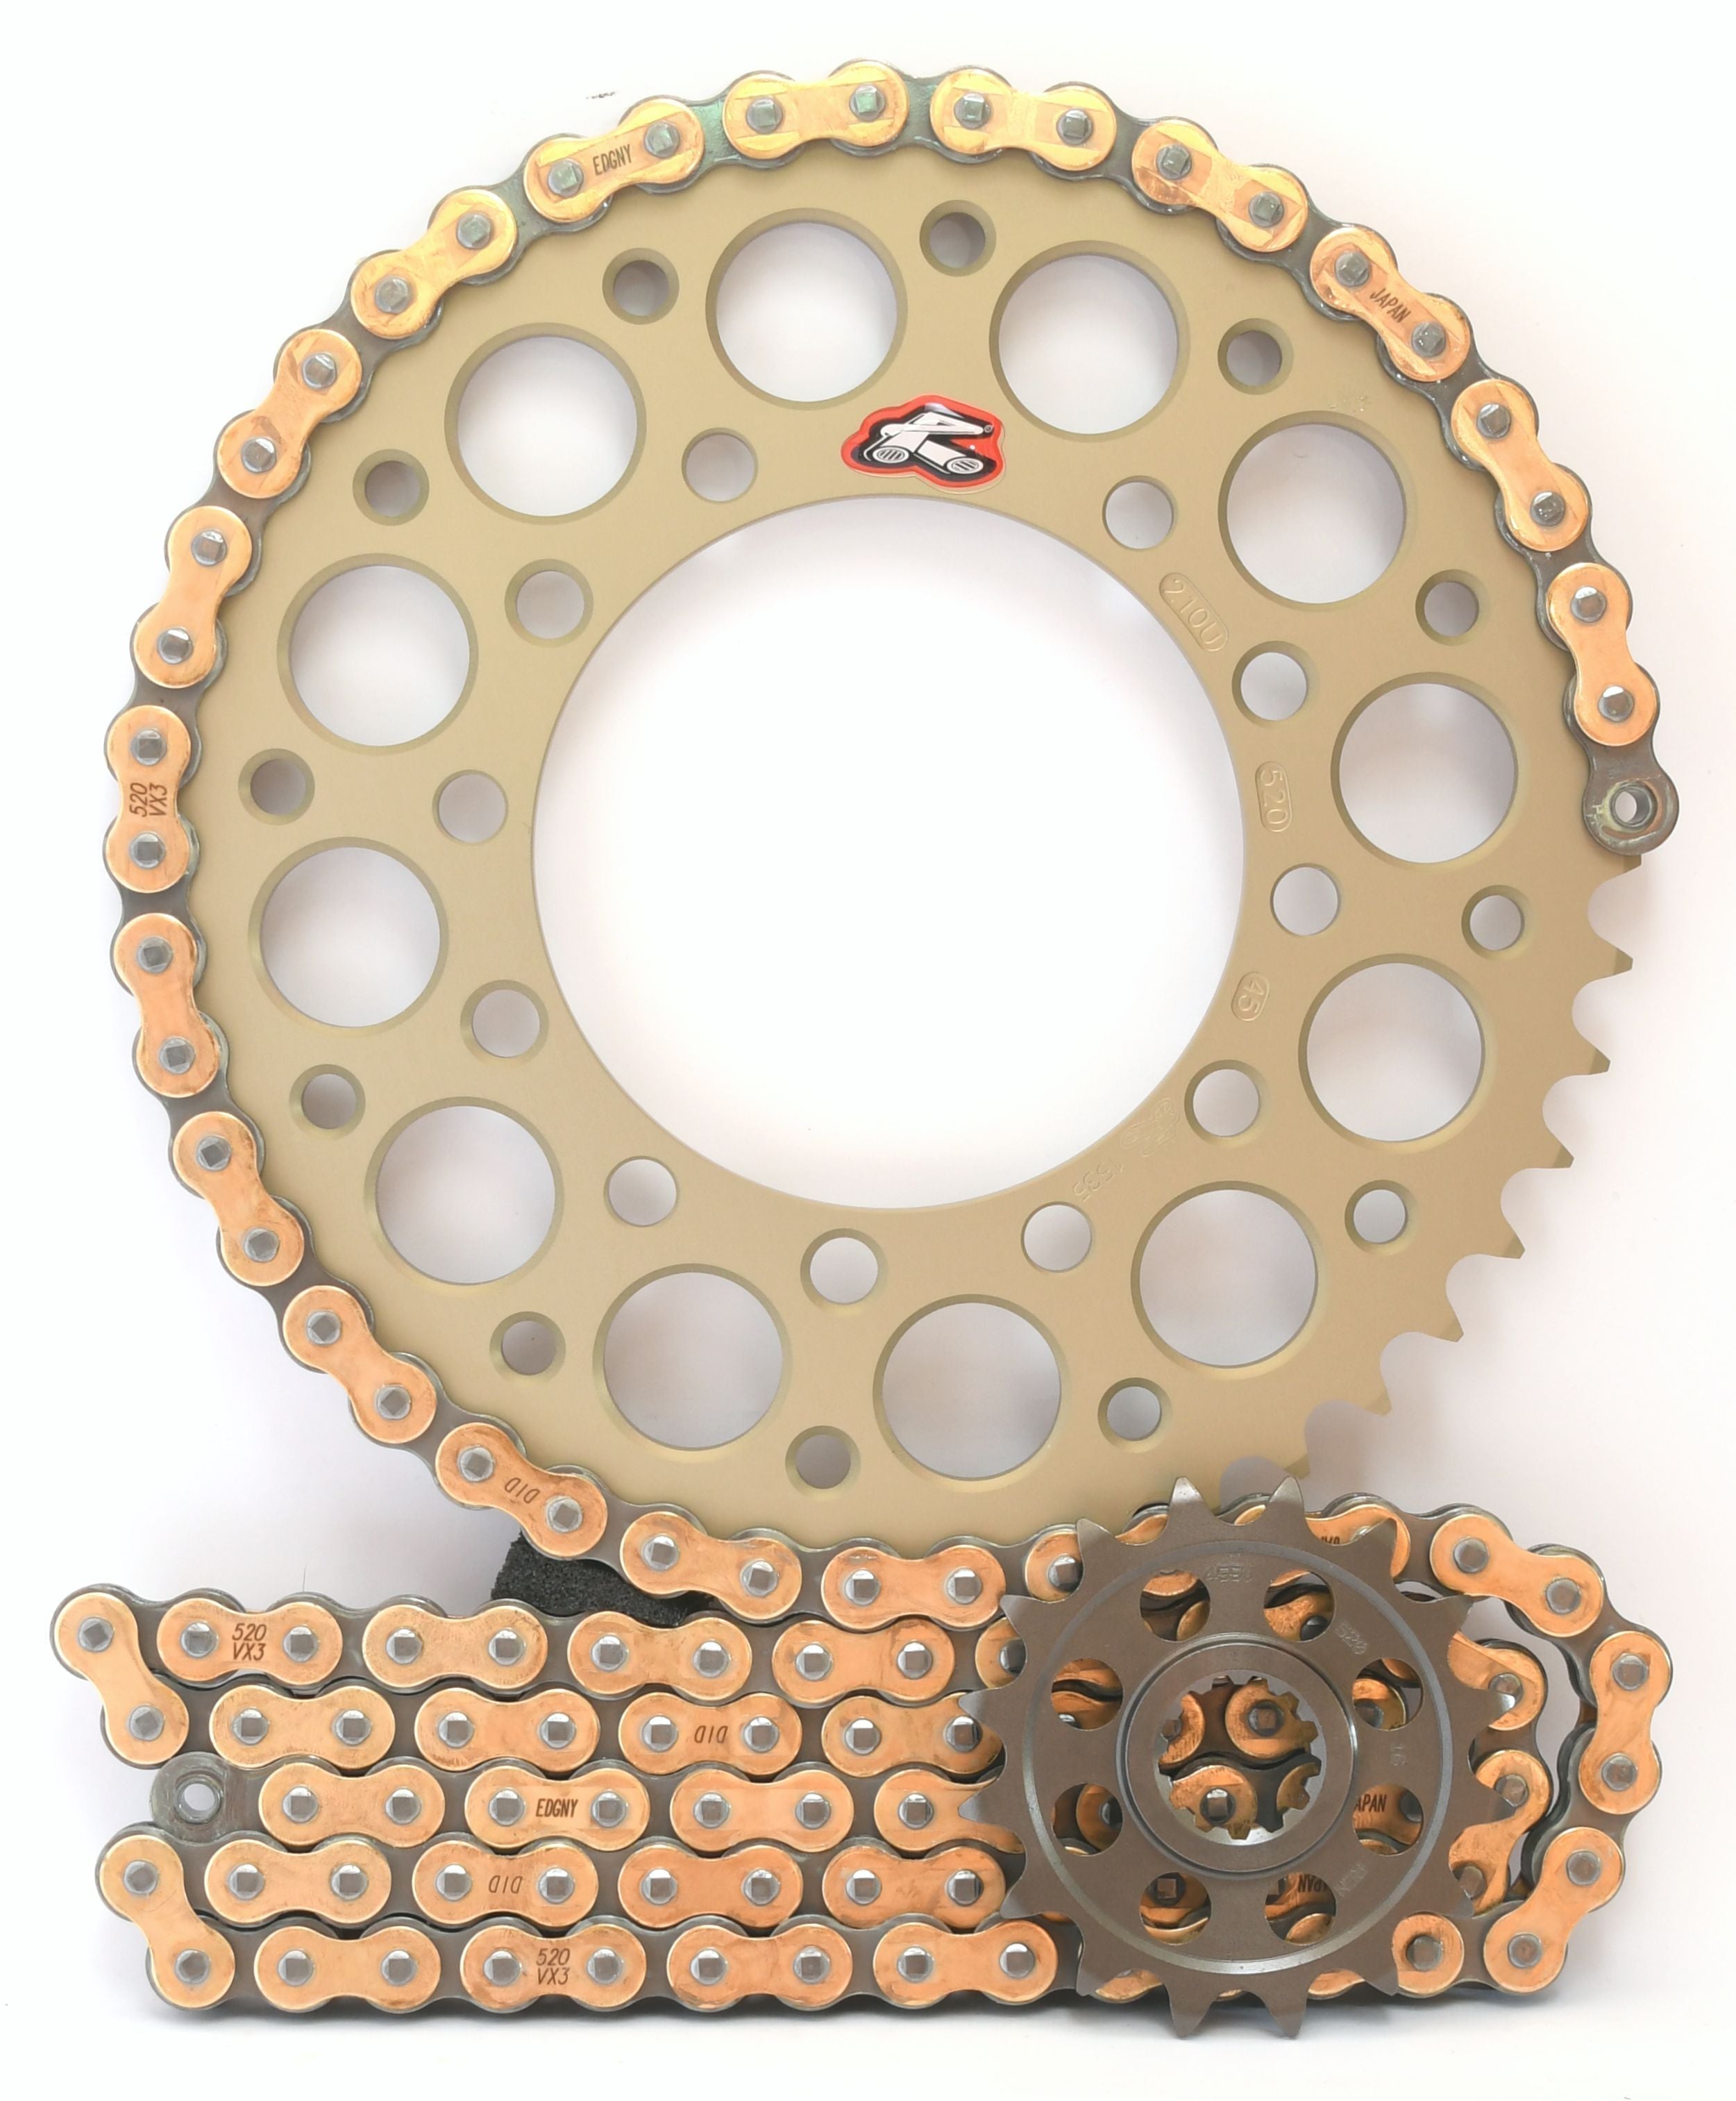 Renthal Ultralight and DID Chain & Sprocket Kit 520 Conversion for GSX-R600 2011-2018 - Standard Gearing